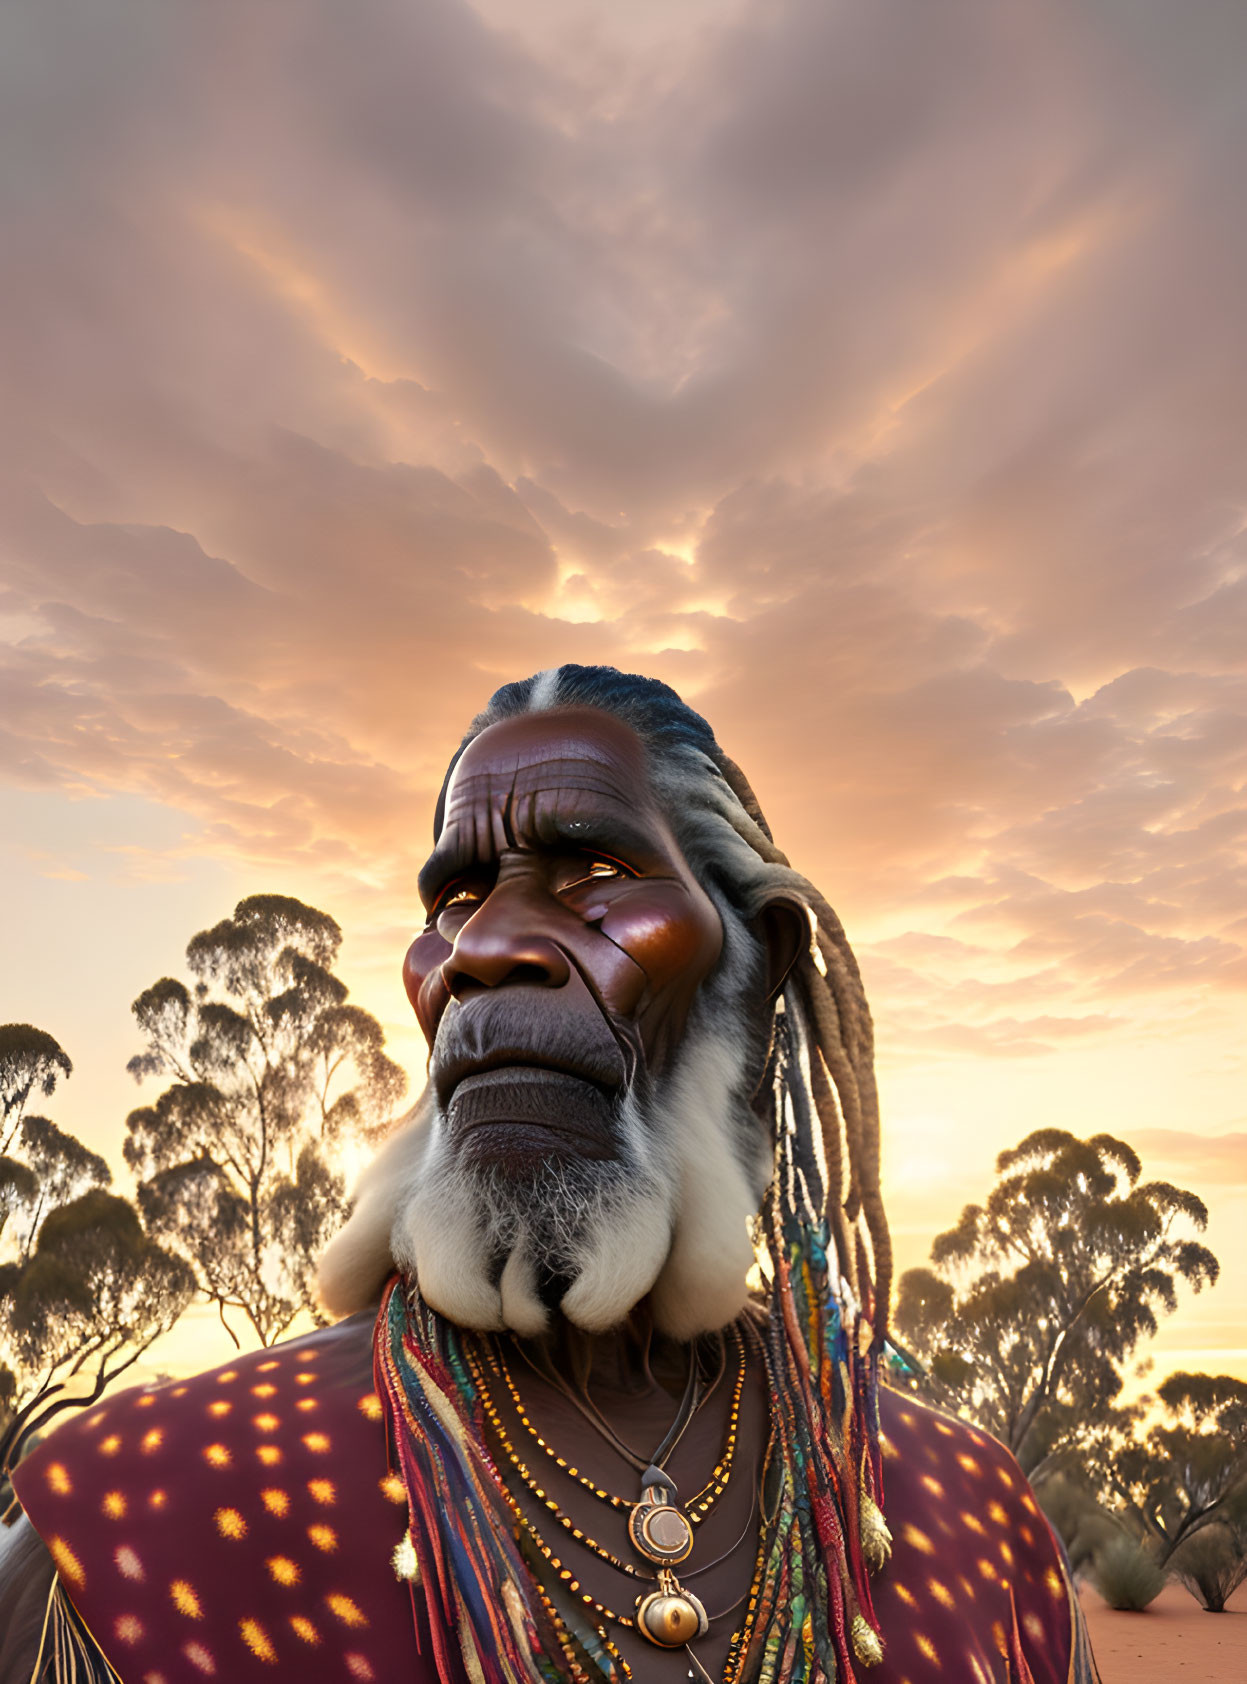 Elder with painted face and beads gazing at sunset in Australian Outback